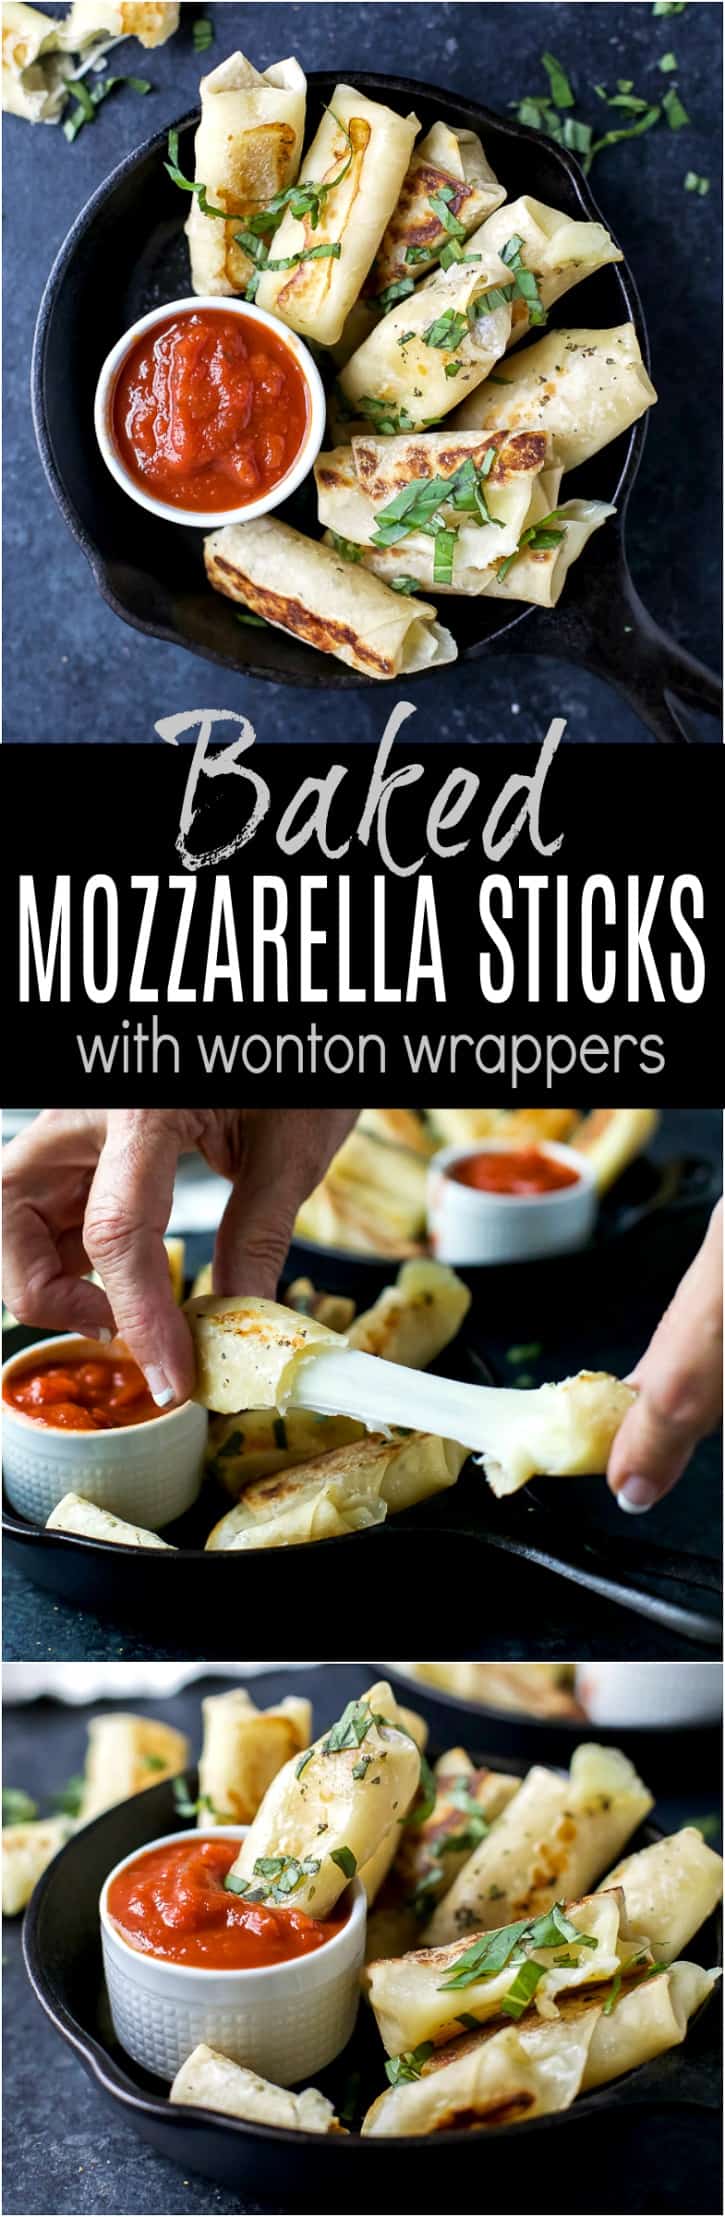 Title image for Baked Mozzarella Sticks wrapped with wonton wrappers